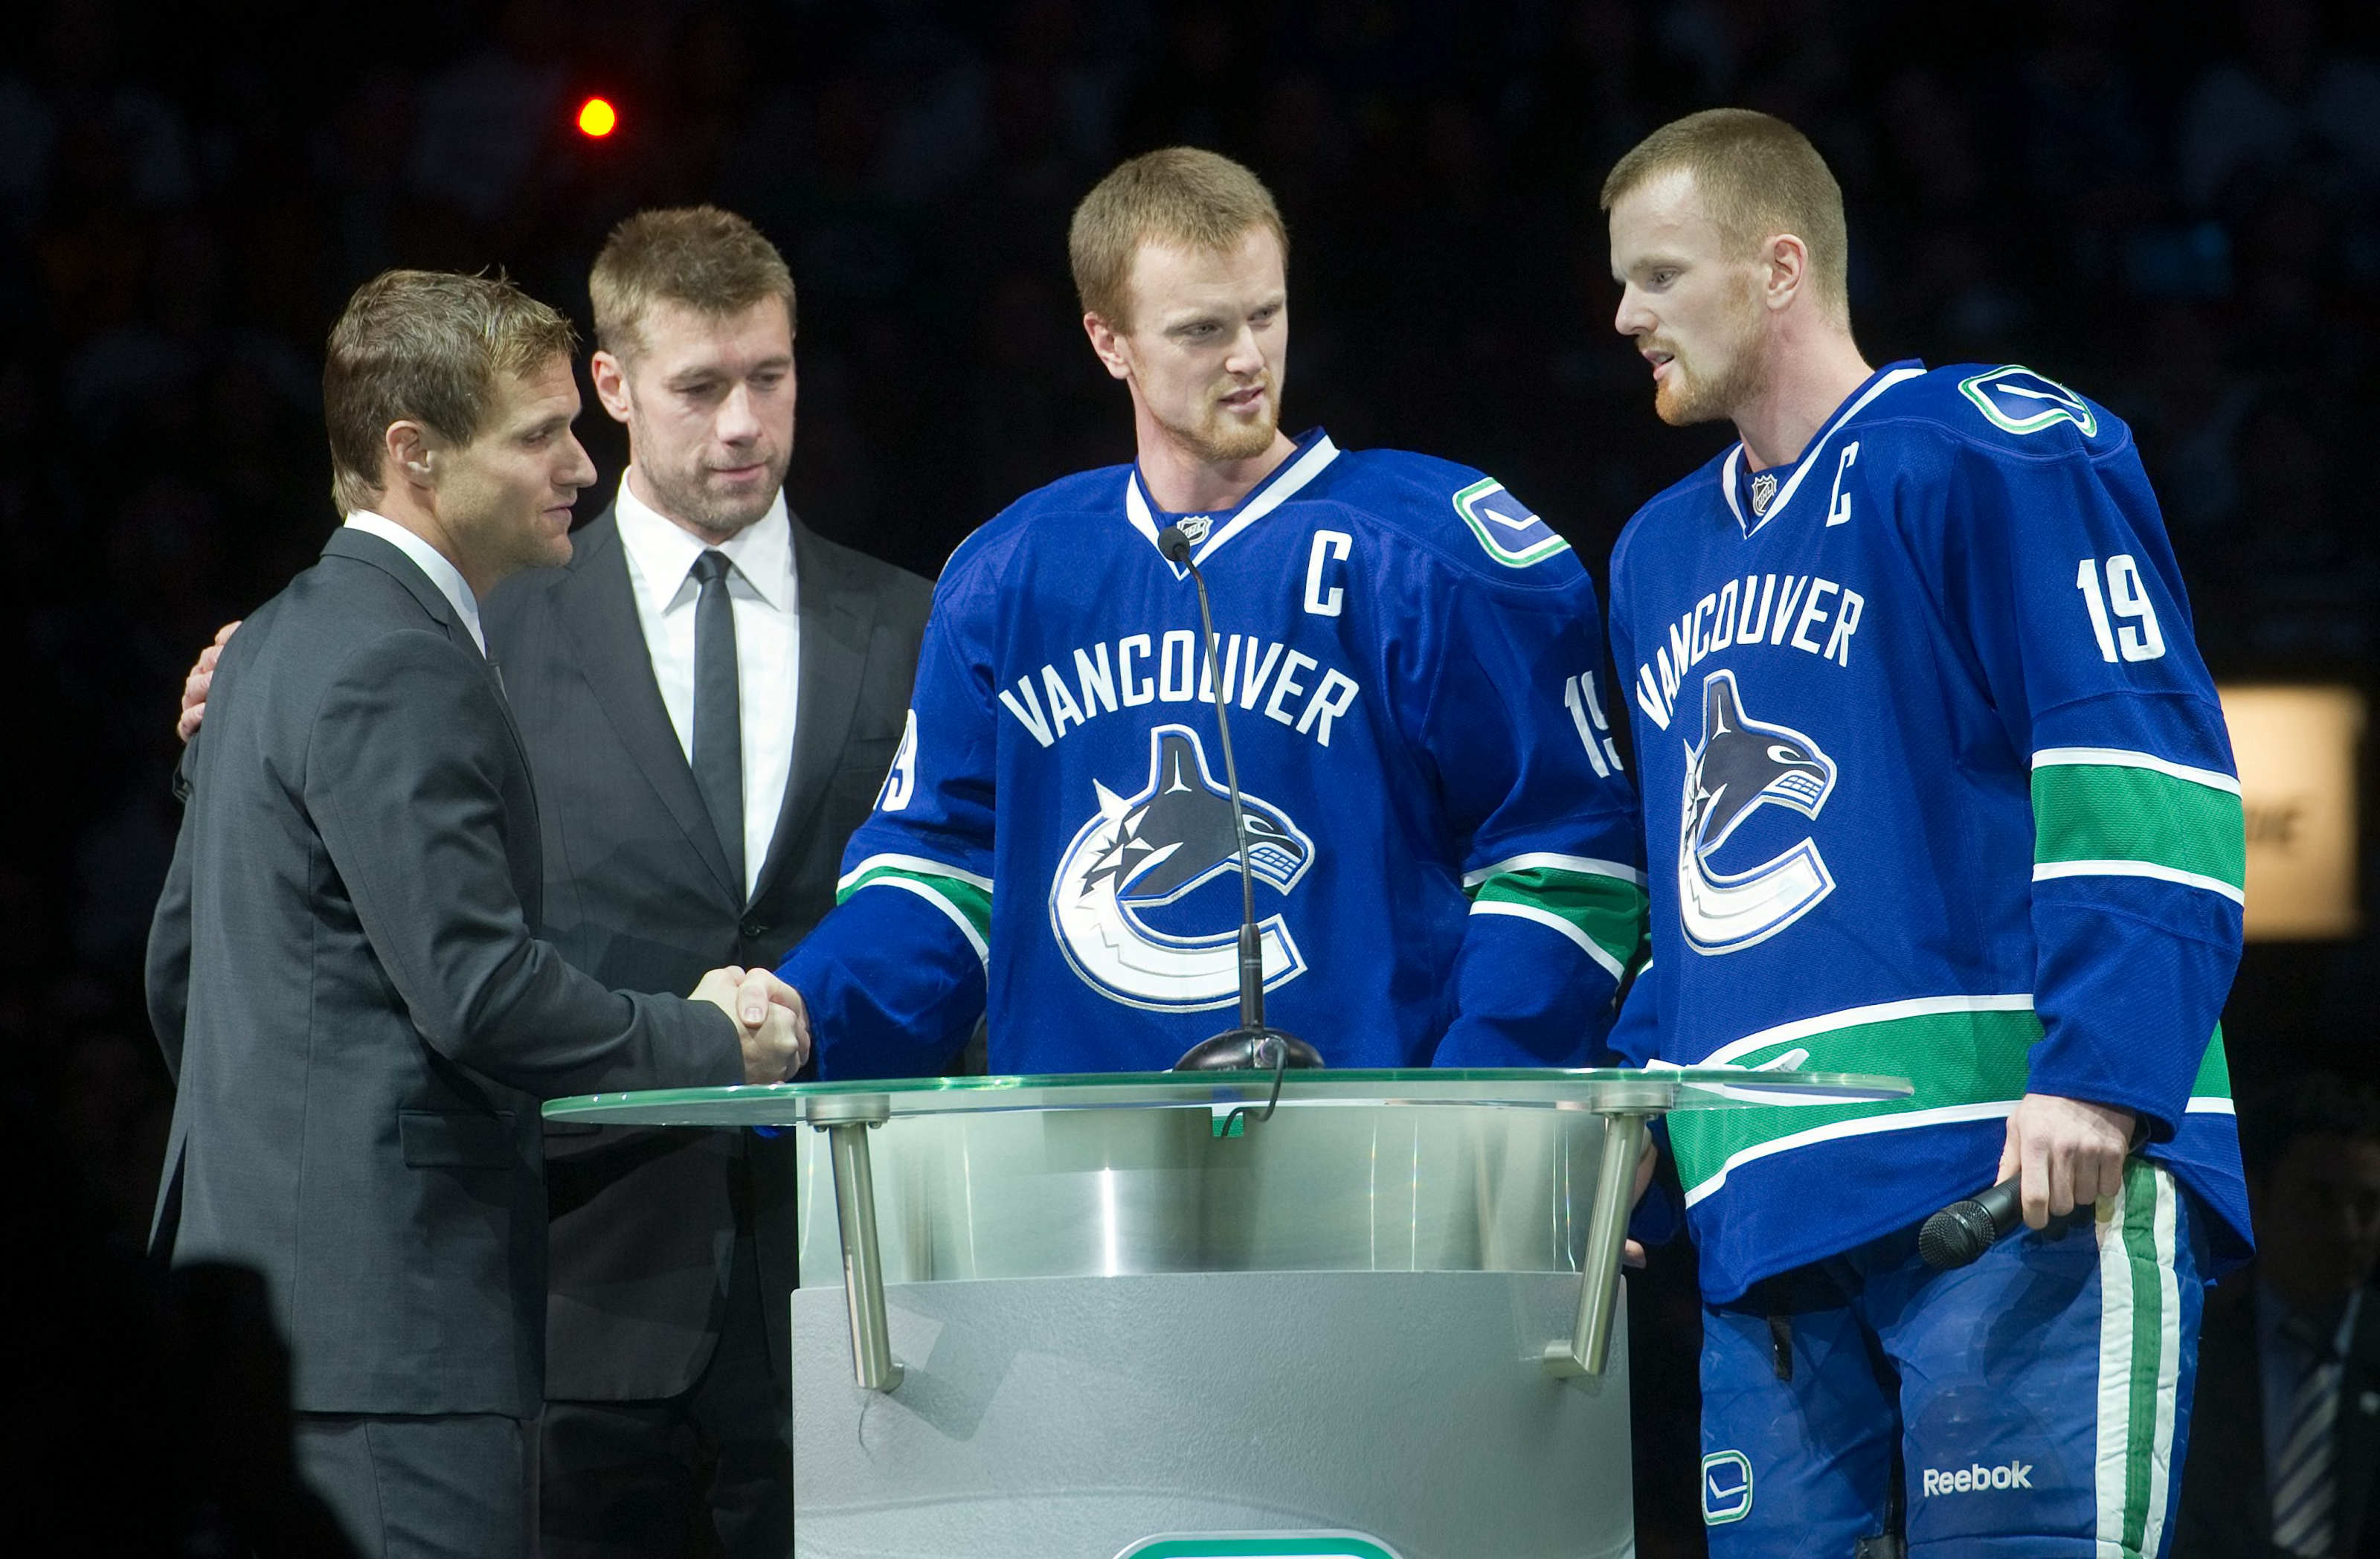 Canucks retire Bure's jersey at Rogers Arena before Leafs game